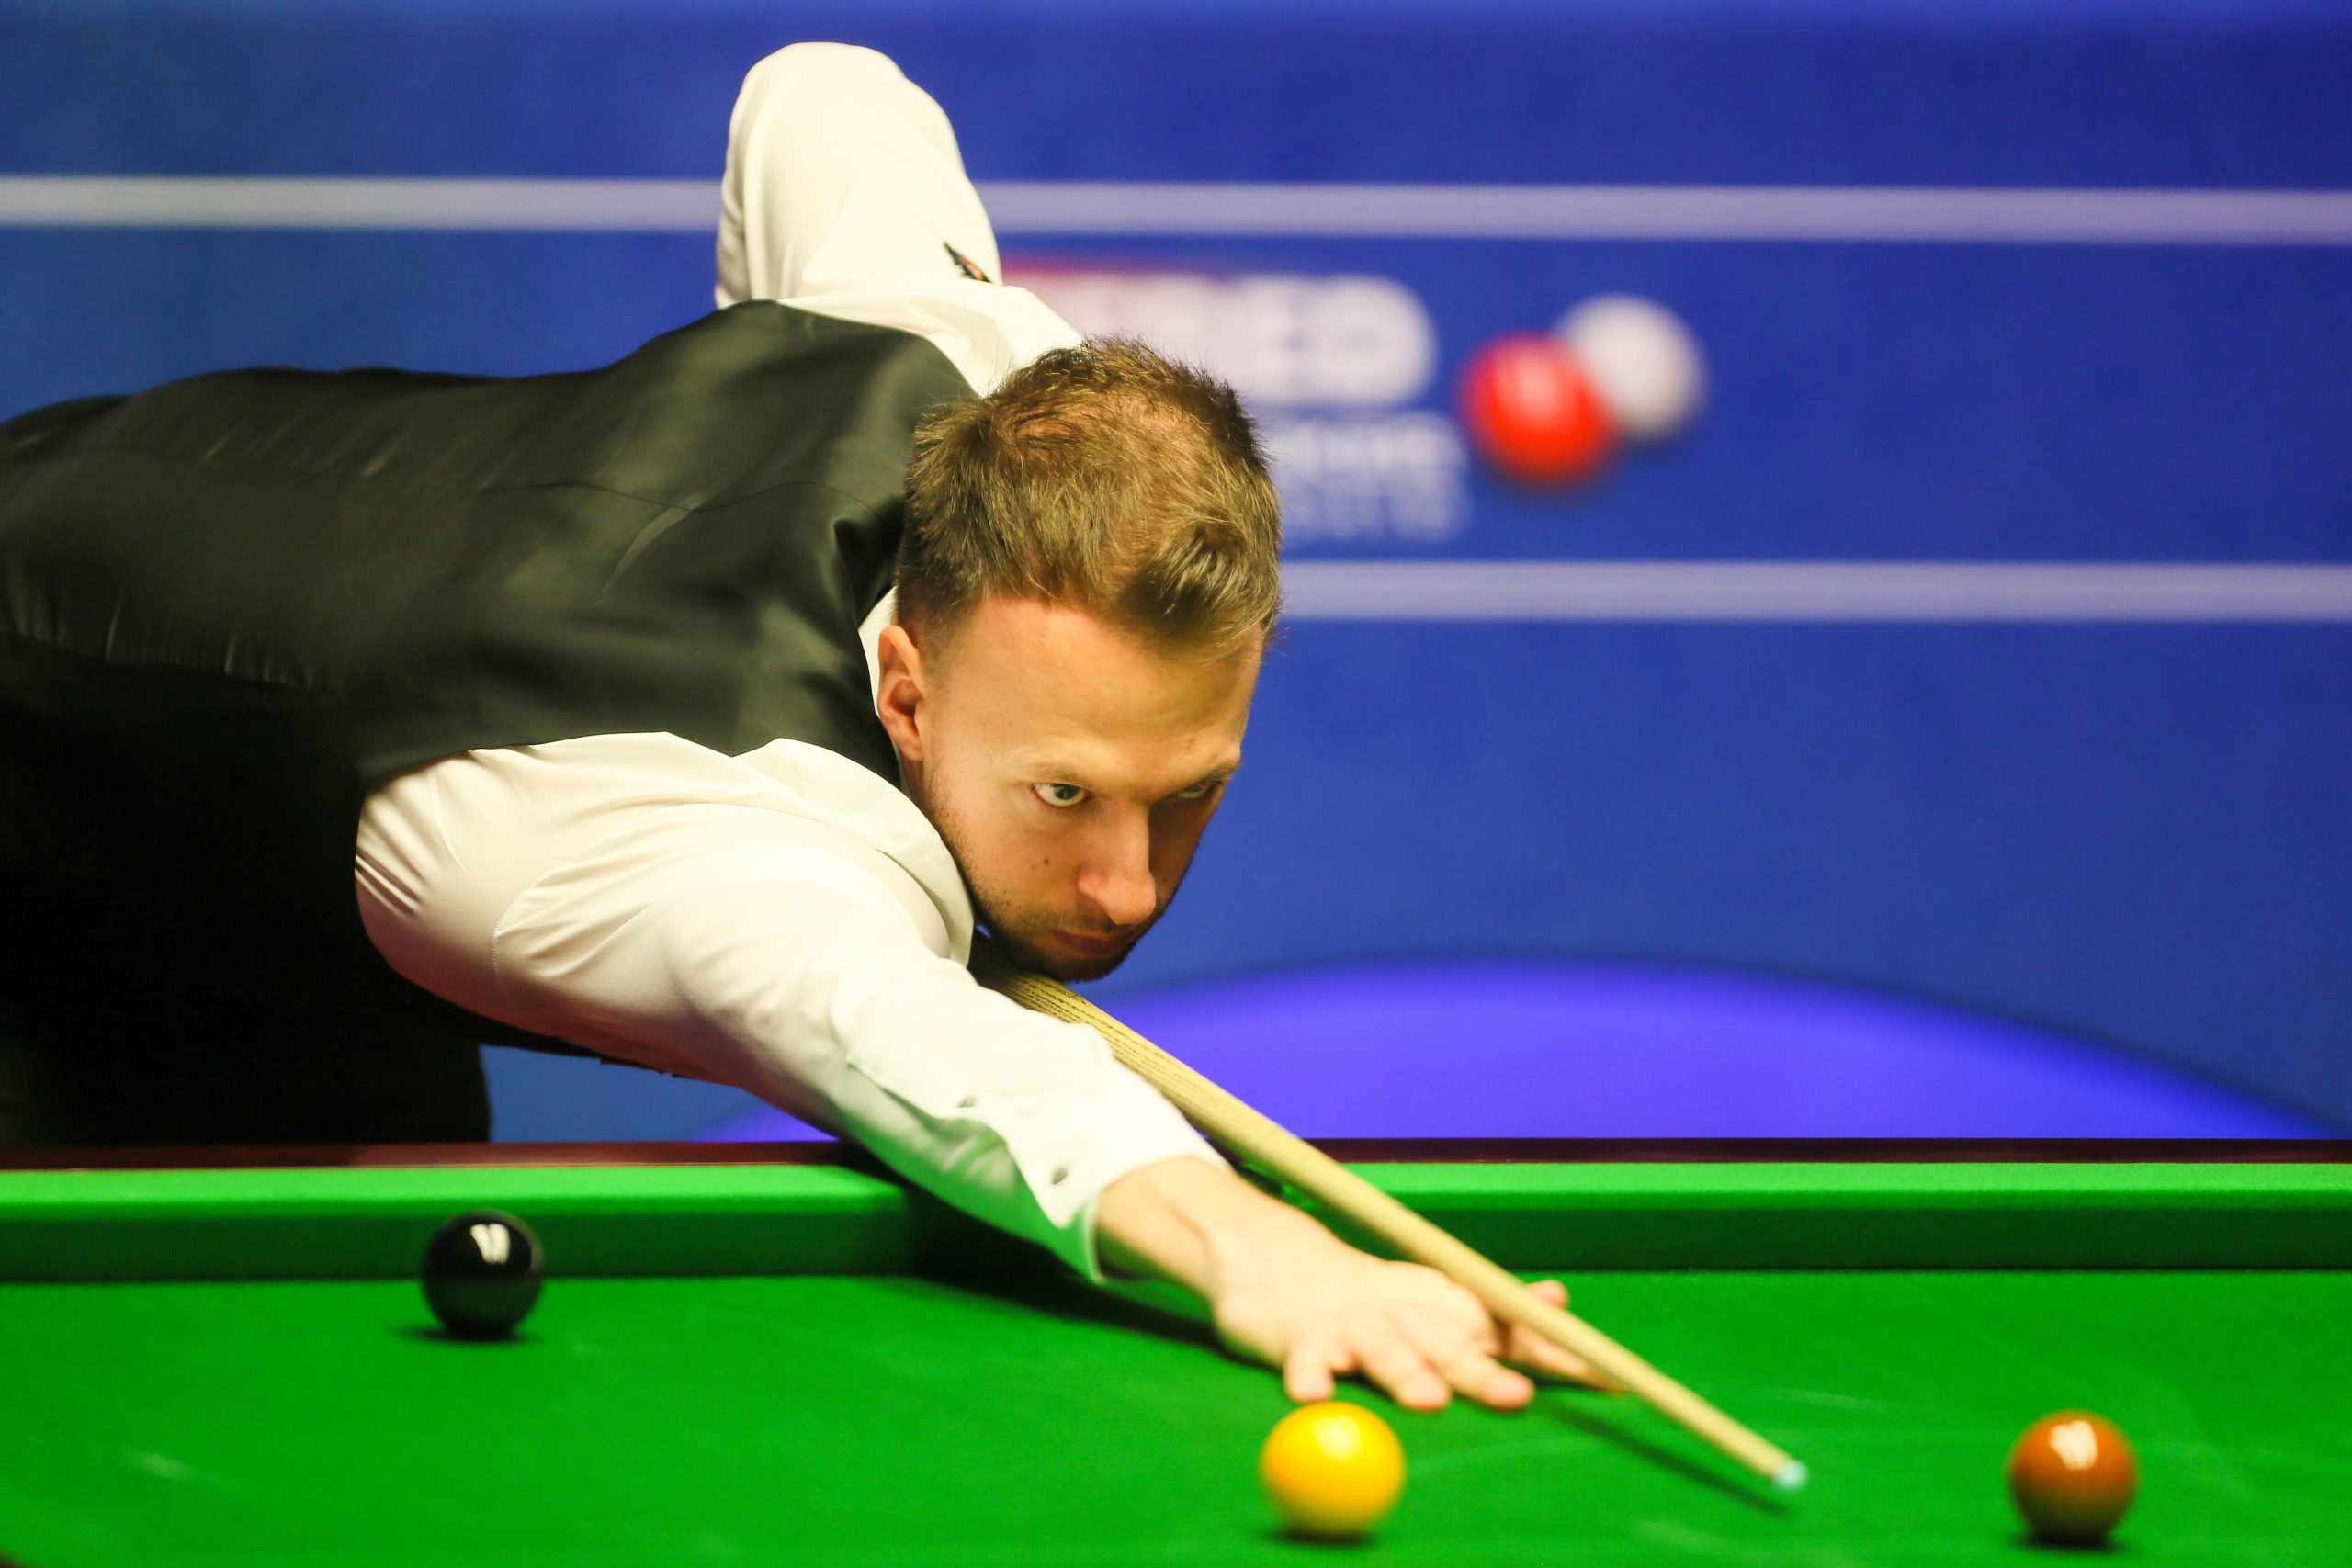 Championship Snooker - Judd Trump is the first player in snooker history to win six ranking titles in a single season - He can win a 7th by winning the Tour Championship in Wales